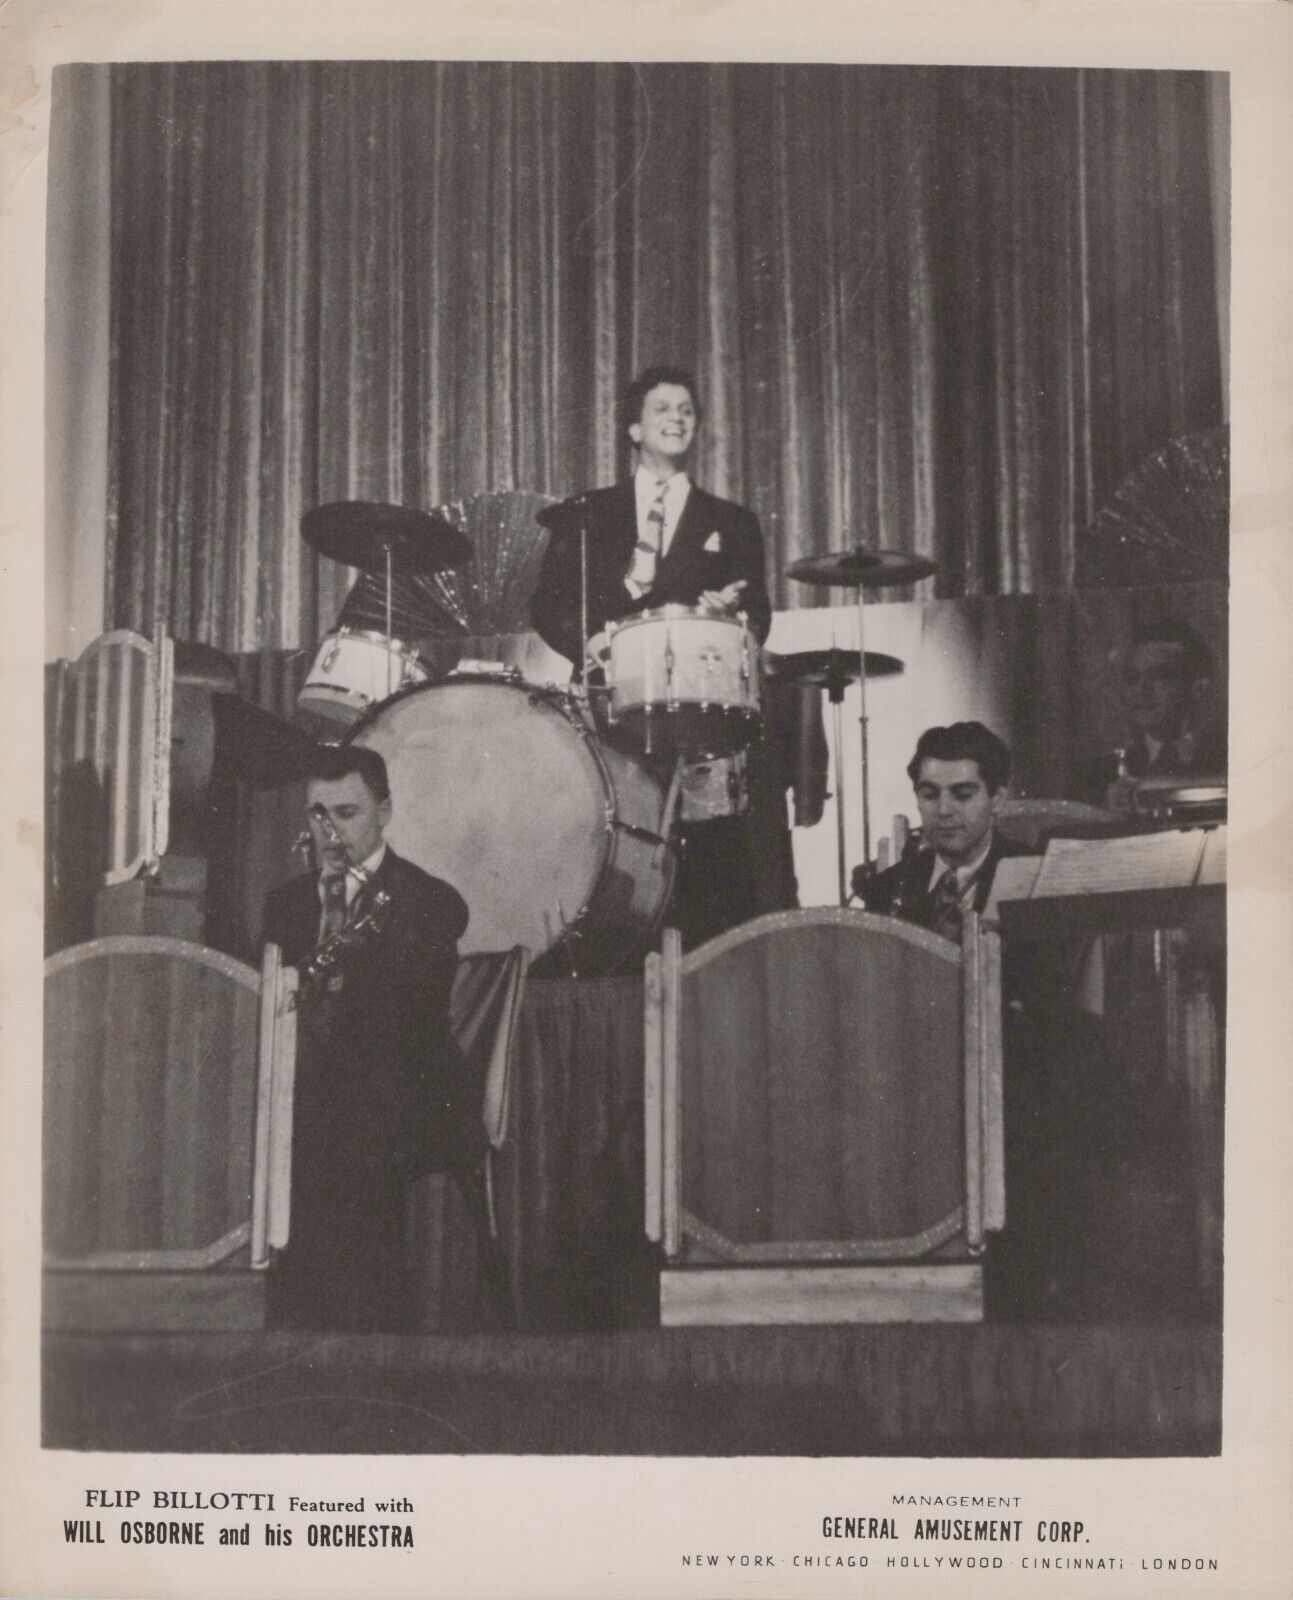 Flip Billoti with Will Osborne and his orchestra (1950s) ❤ Vintage Photo K 541